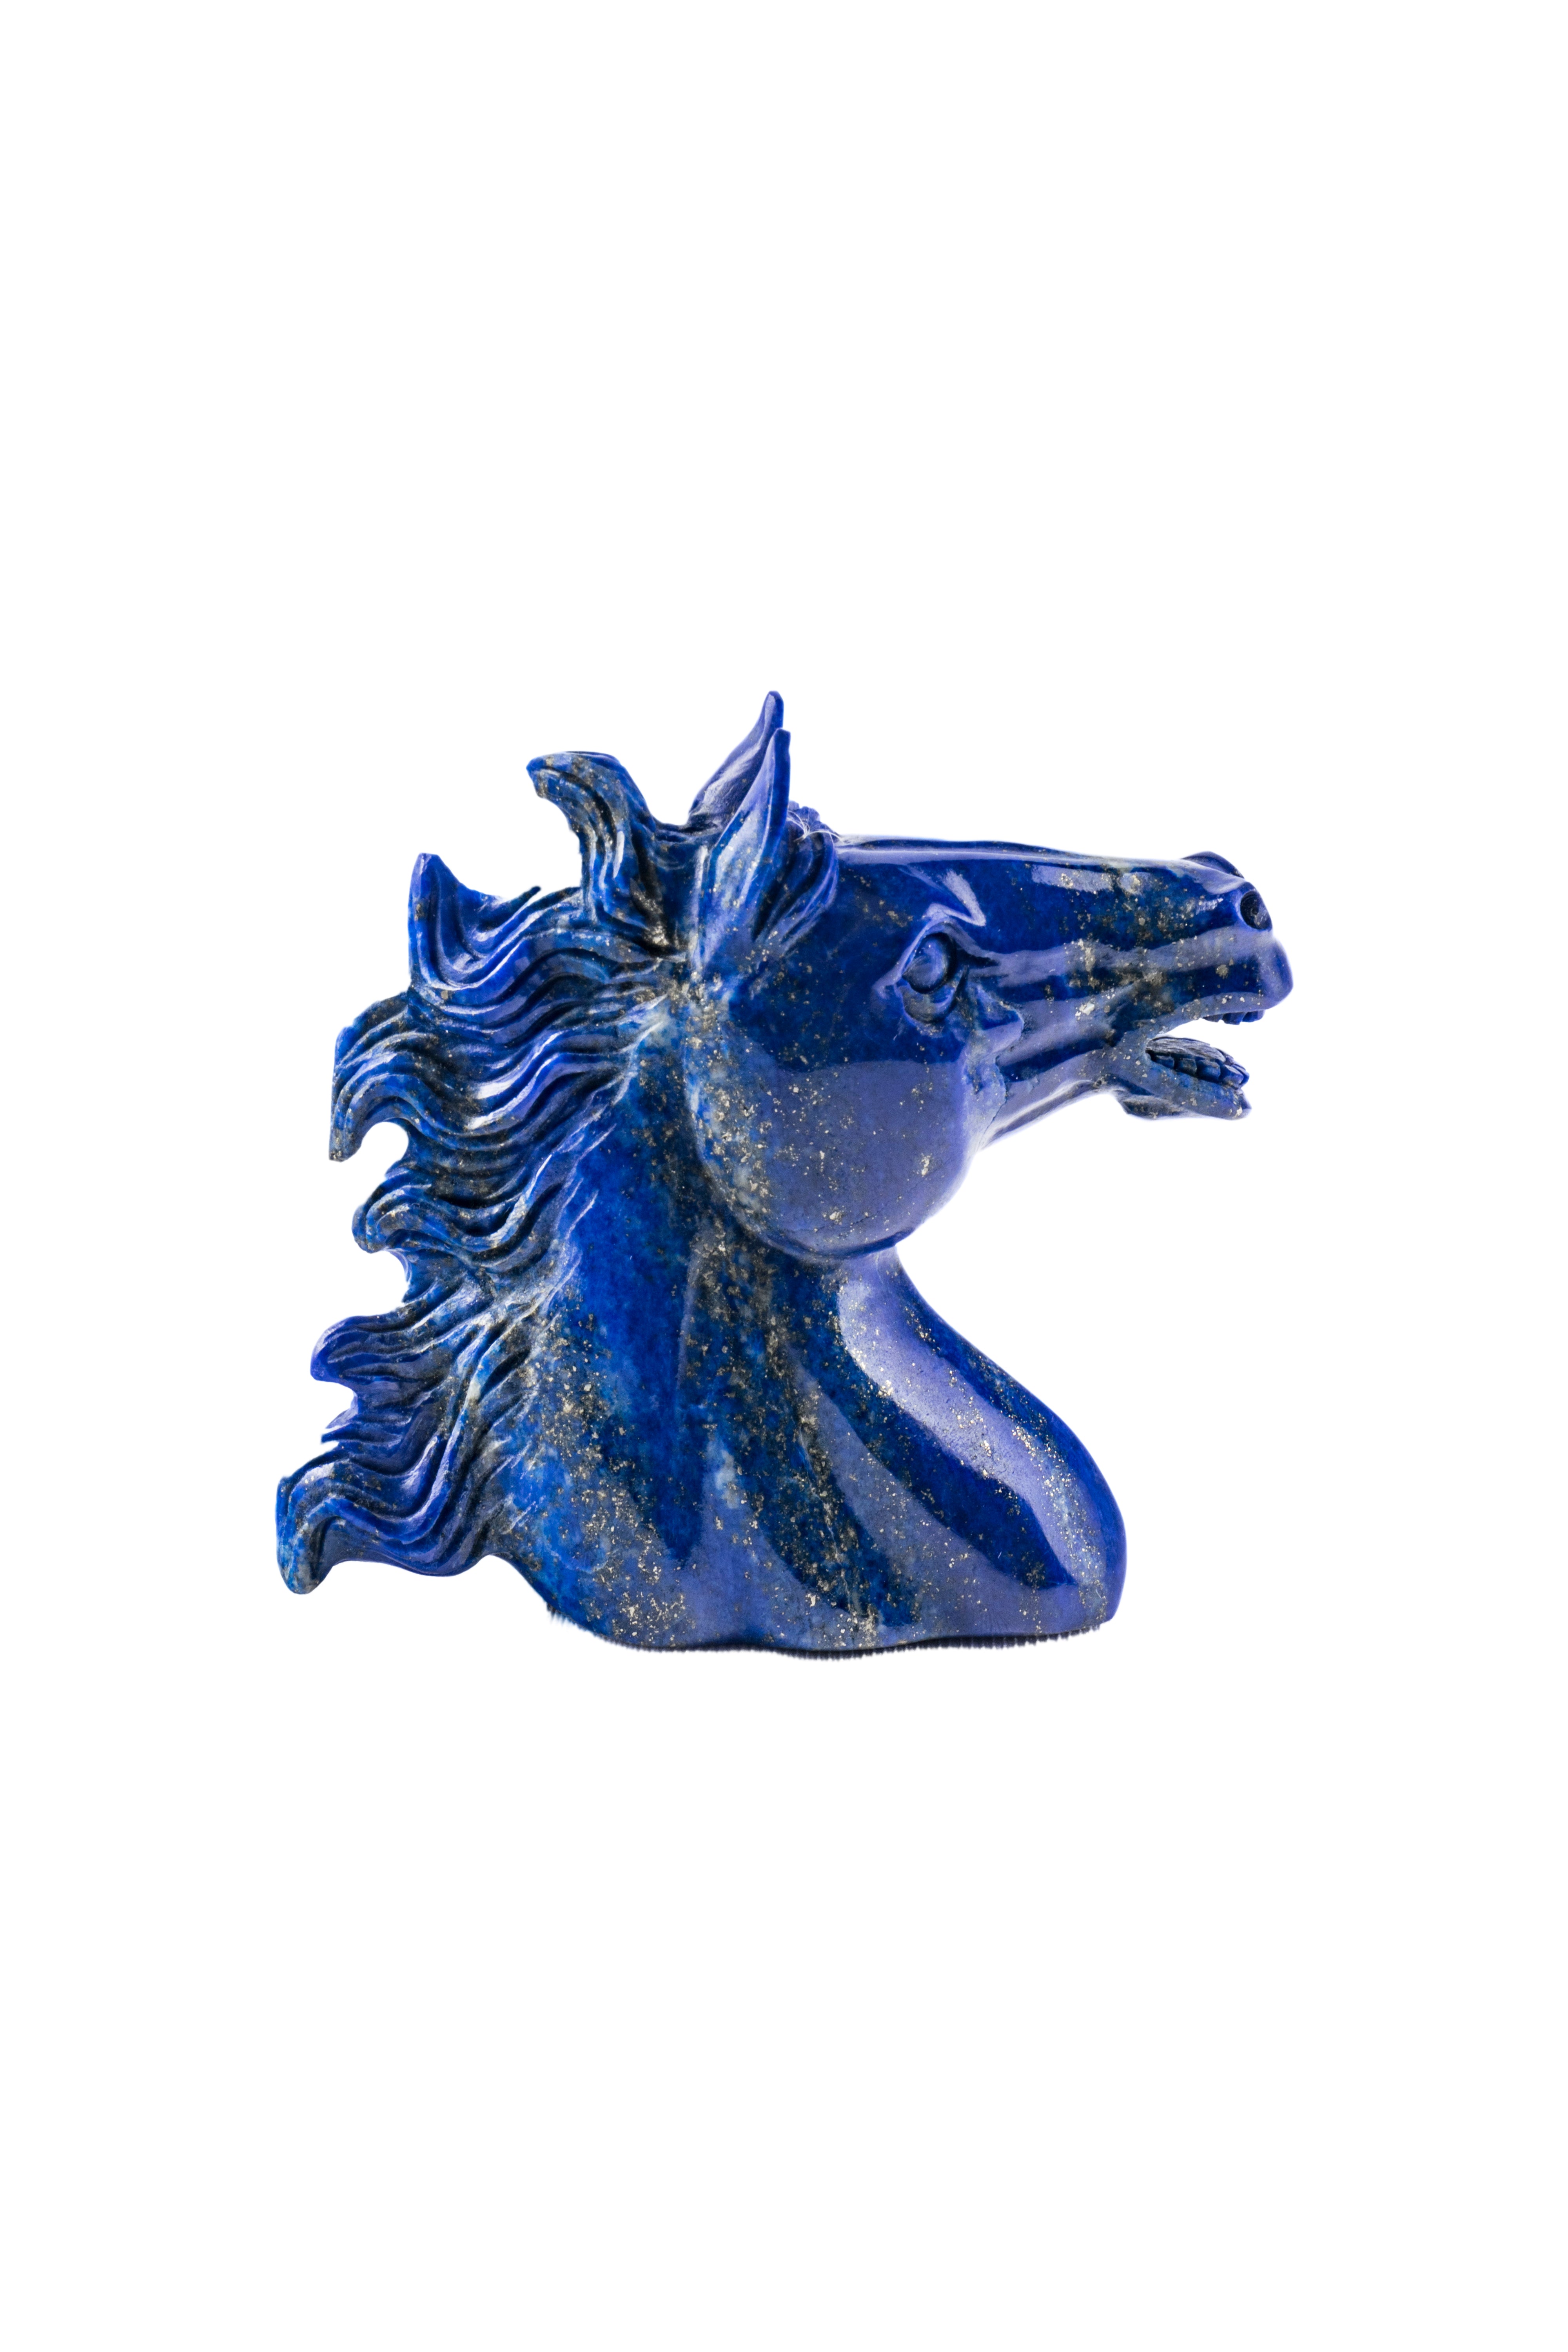 JIRI PACINEK - Blue Horse Showpiece - Add warmth and visual delight to your room with this unique decor